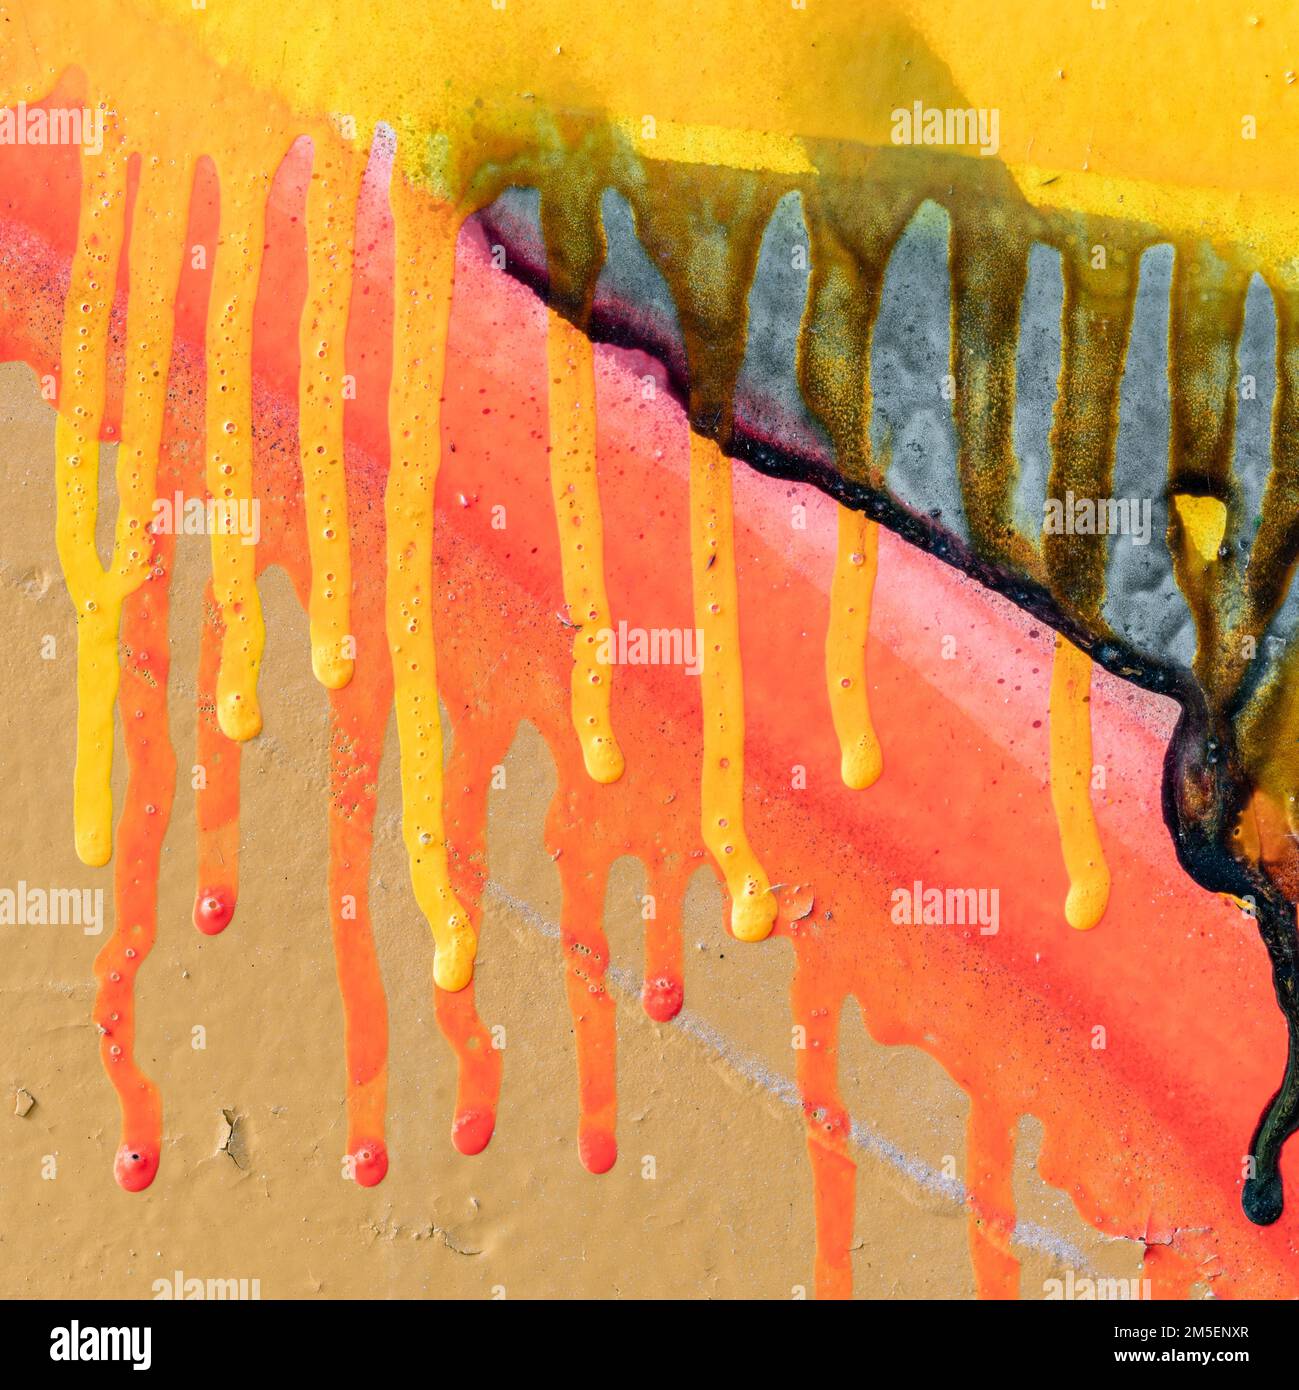 Square image of red and yellow paint runs against a grey background Stock Photo